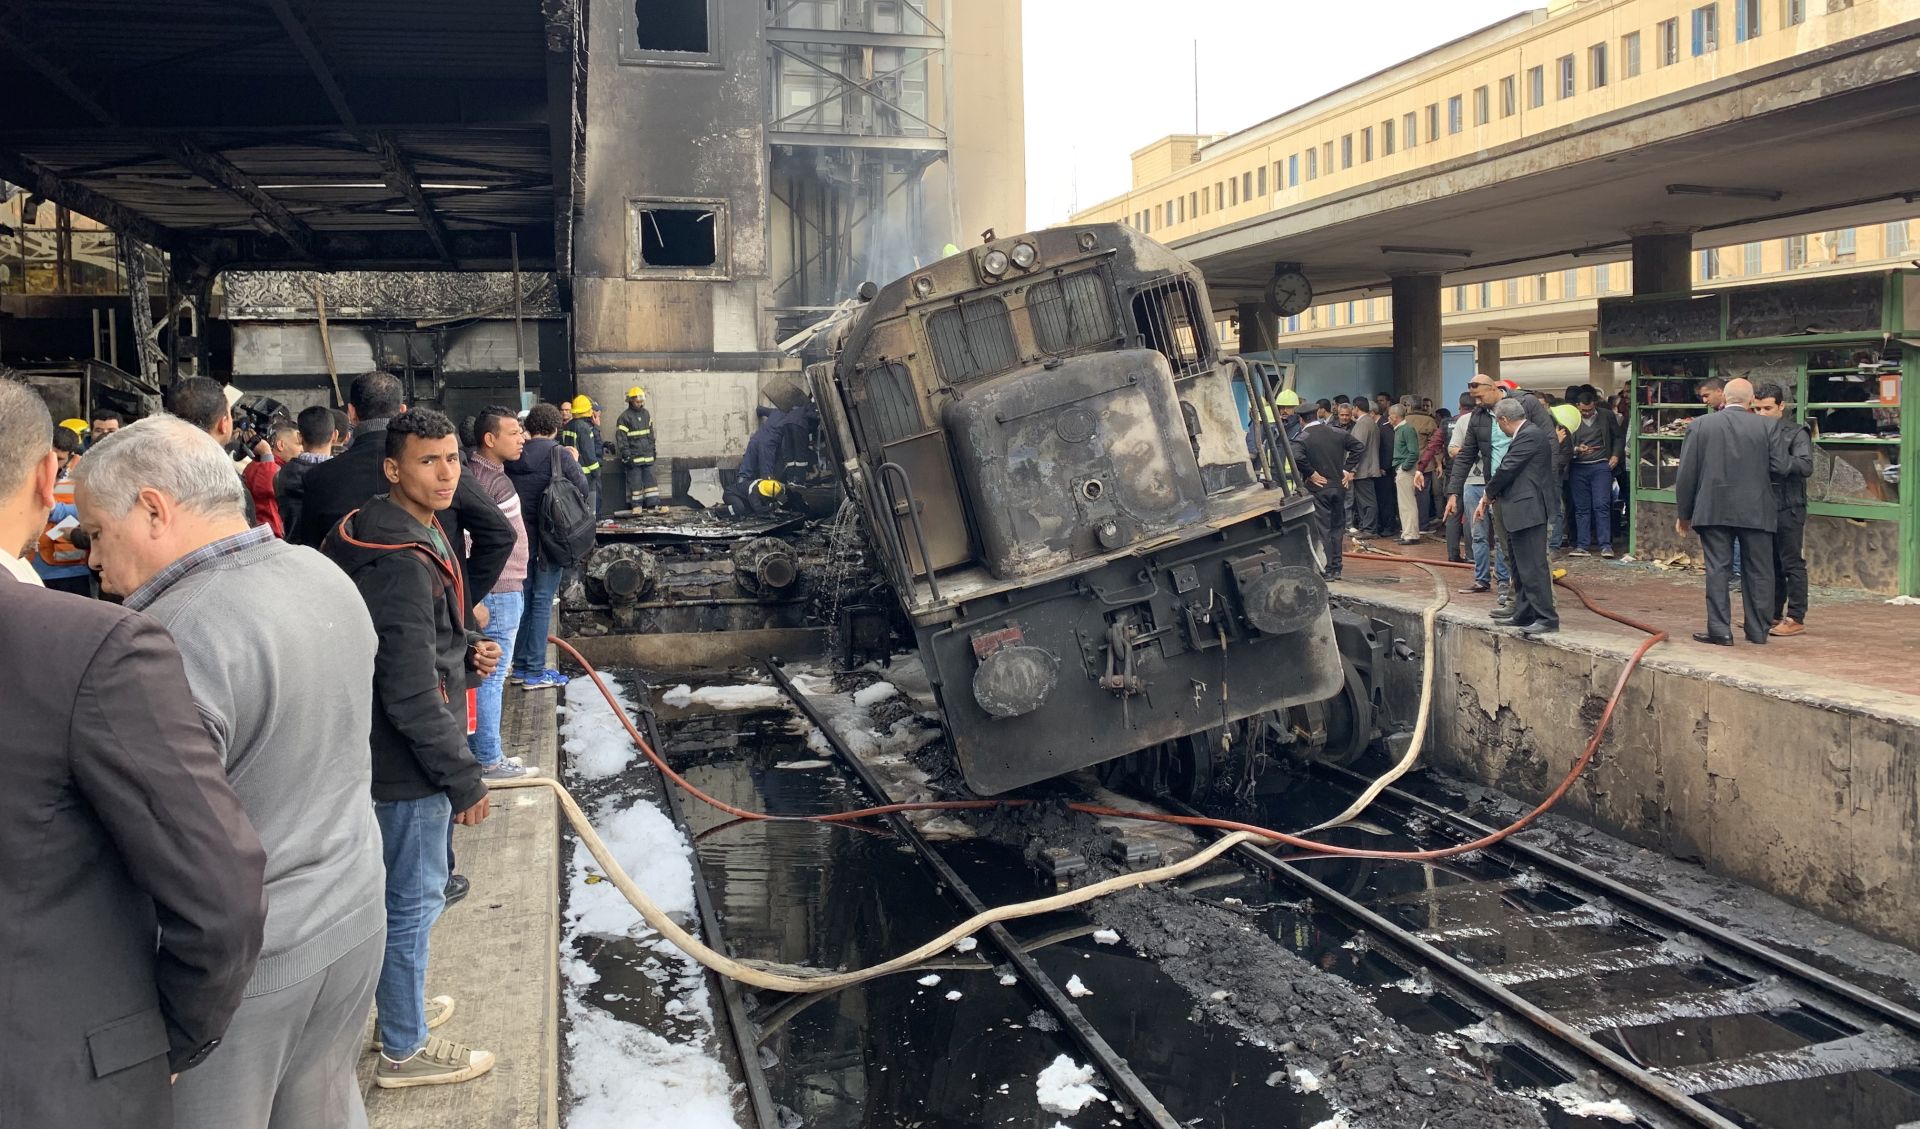 epa07400366 A destroyed train restst on tracks at the main train station in Cairo, Egypt, 27 February 2019. Local media reports state at least ten people died and 22 were injured after a large fire engulfed an area at the main train station, possible triggered by an explosion of a fuel tank of a passing train. It is feared the number of casualties could rise.  EPA/KHALED ELFIQI